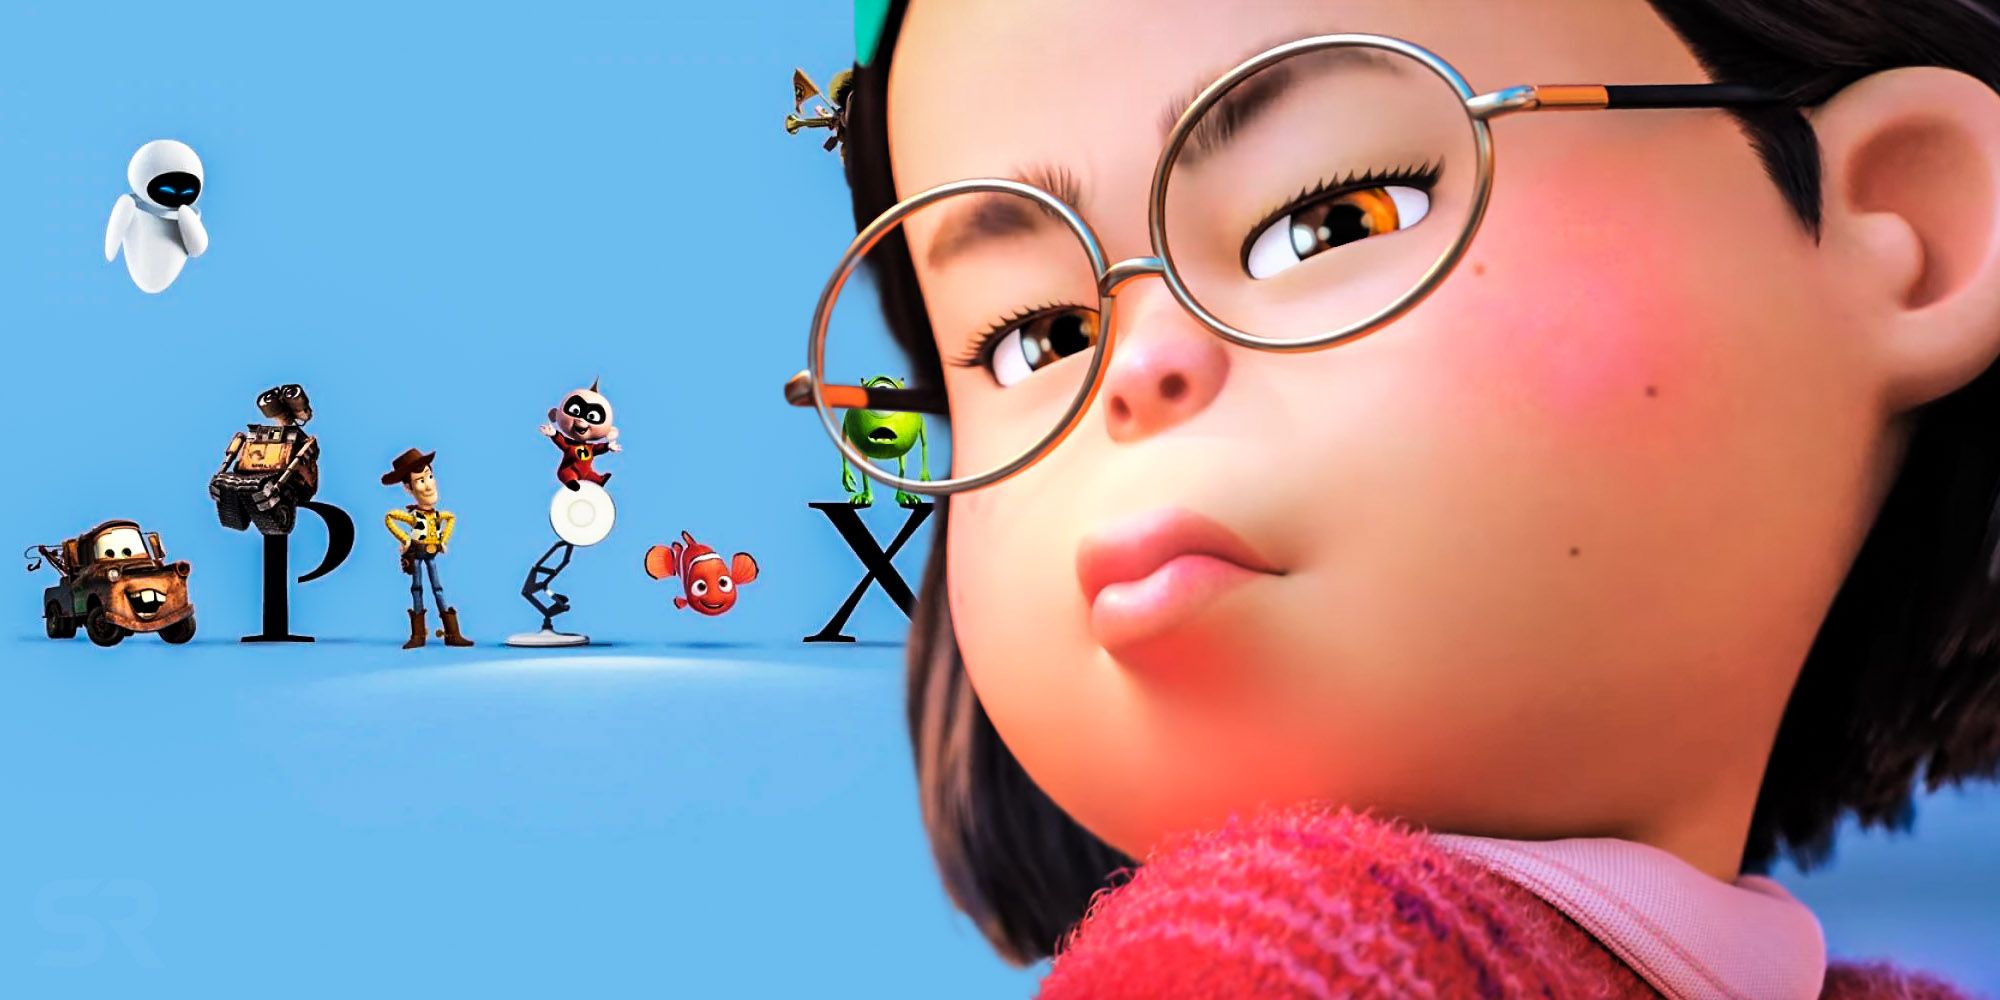 Why Turning Red Looks So Different From Other Pixar Movies